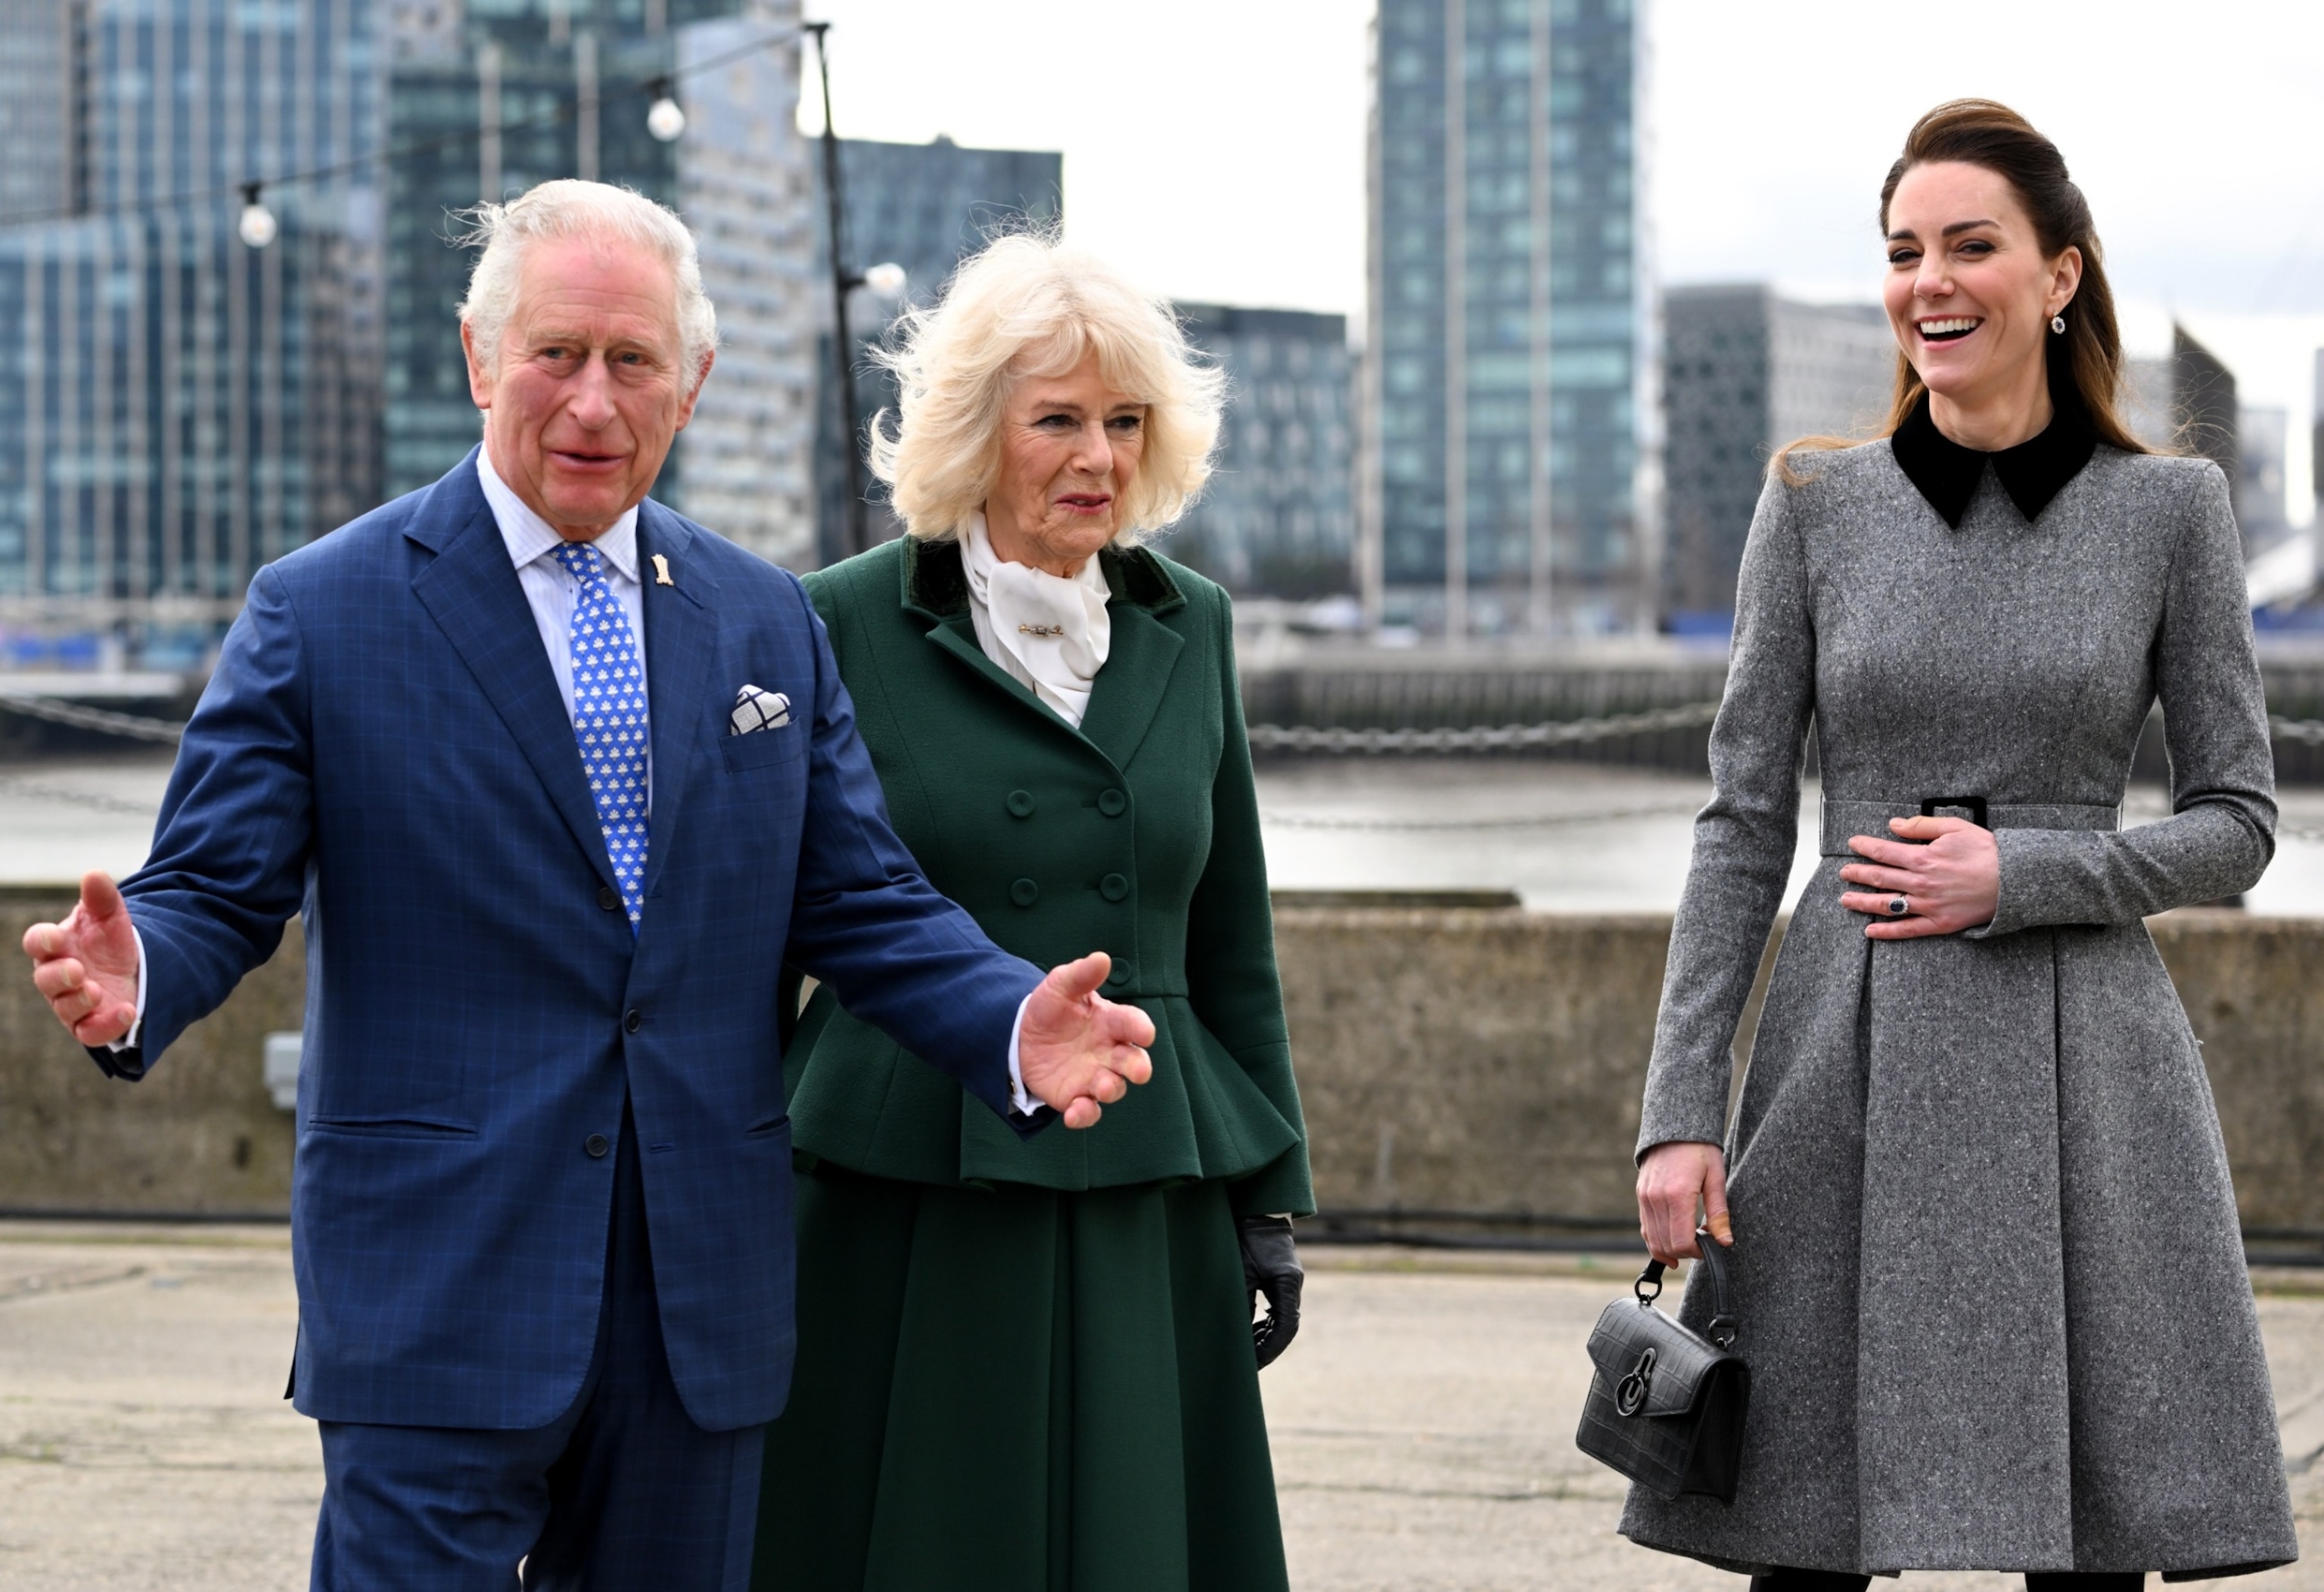 PHOTO: Prince Charles, Prince of Wales, Camilla, Duchess of Cornwall and Catherine, Duchess of Cambridge arrive for their visit to The Prince's Foundation training site for arts and culture at Trinity Buoy Wharf, Feb. 3, 2022, in London.